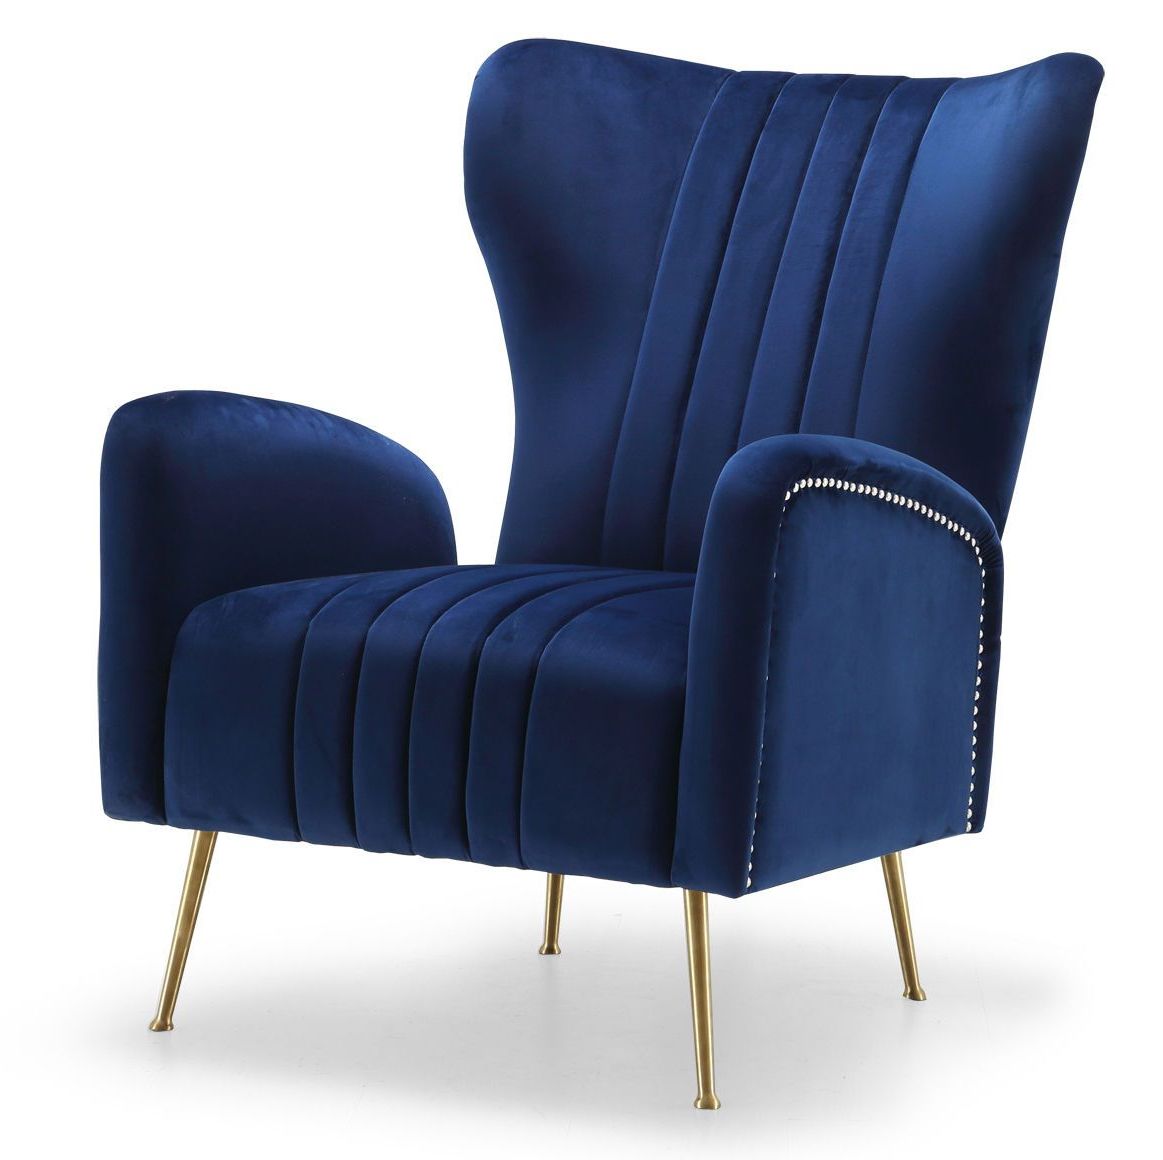 Fashionable Opera Navy Chair 532 Meridian Furniture Chairs In 2020 Pertaining To Lauretta Velvet Wingback Chairs (View 8 of 20)